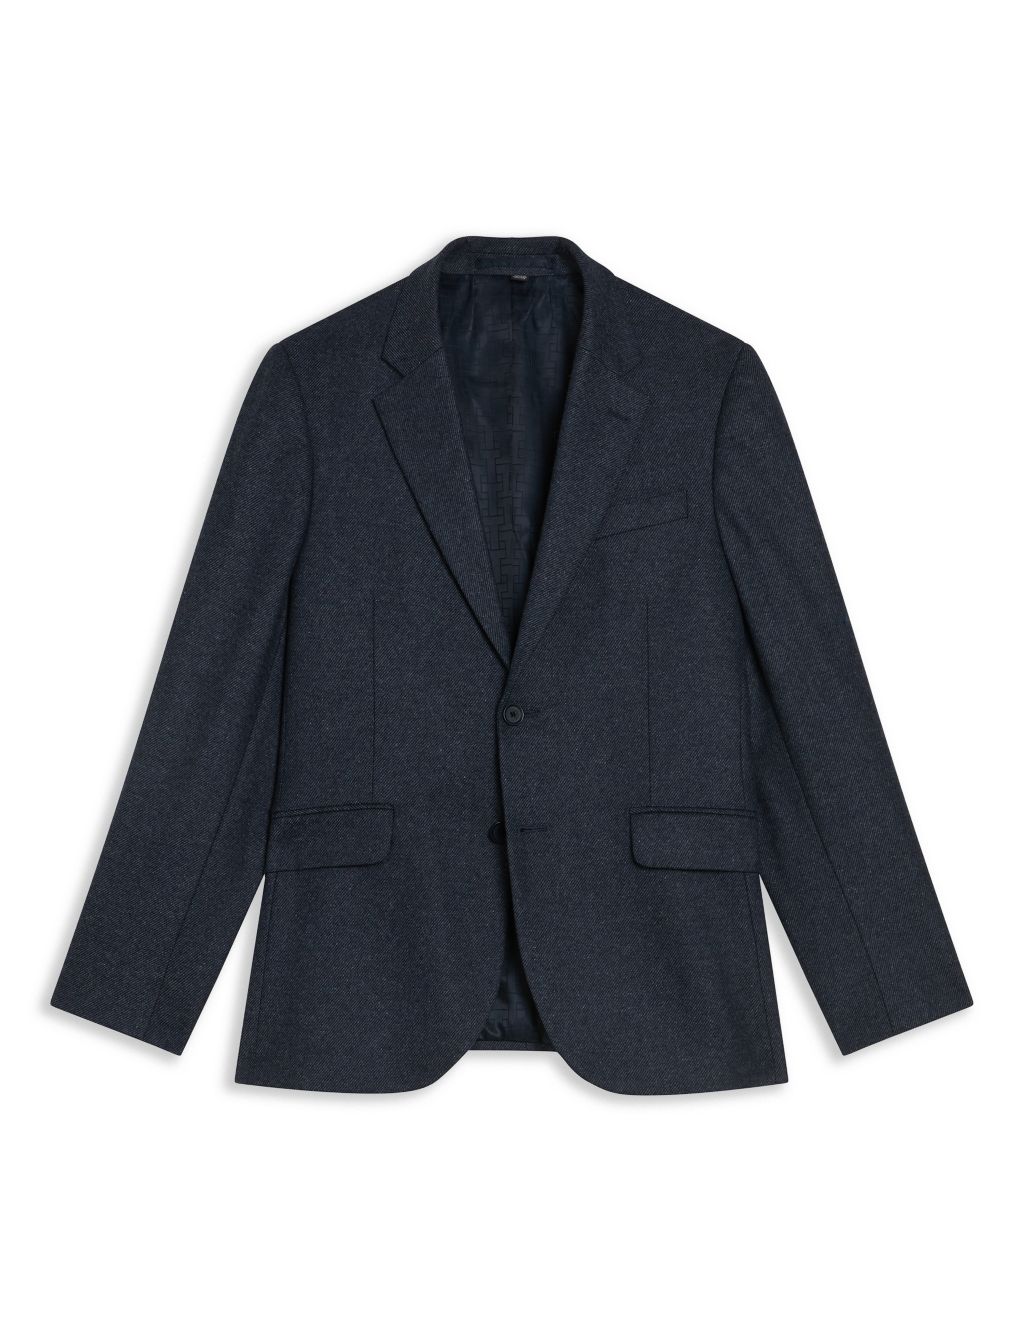 Regular Fit Wool Rich Twill Suit Jacket image 2